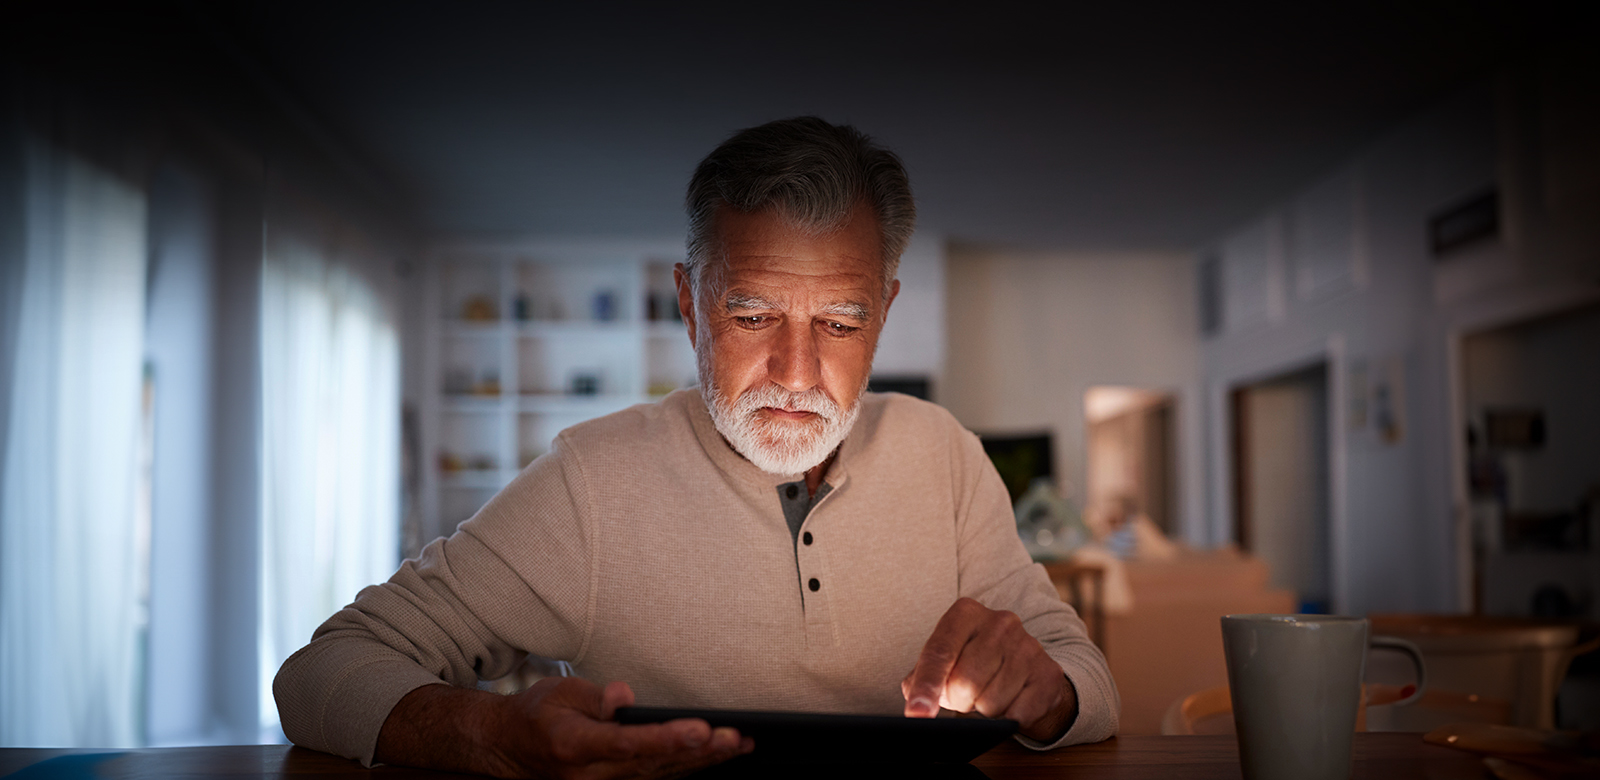 man holding tablet in low lighting